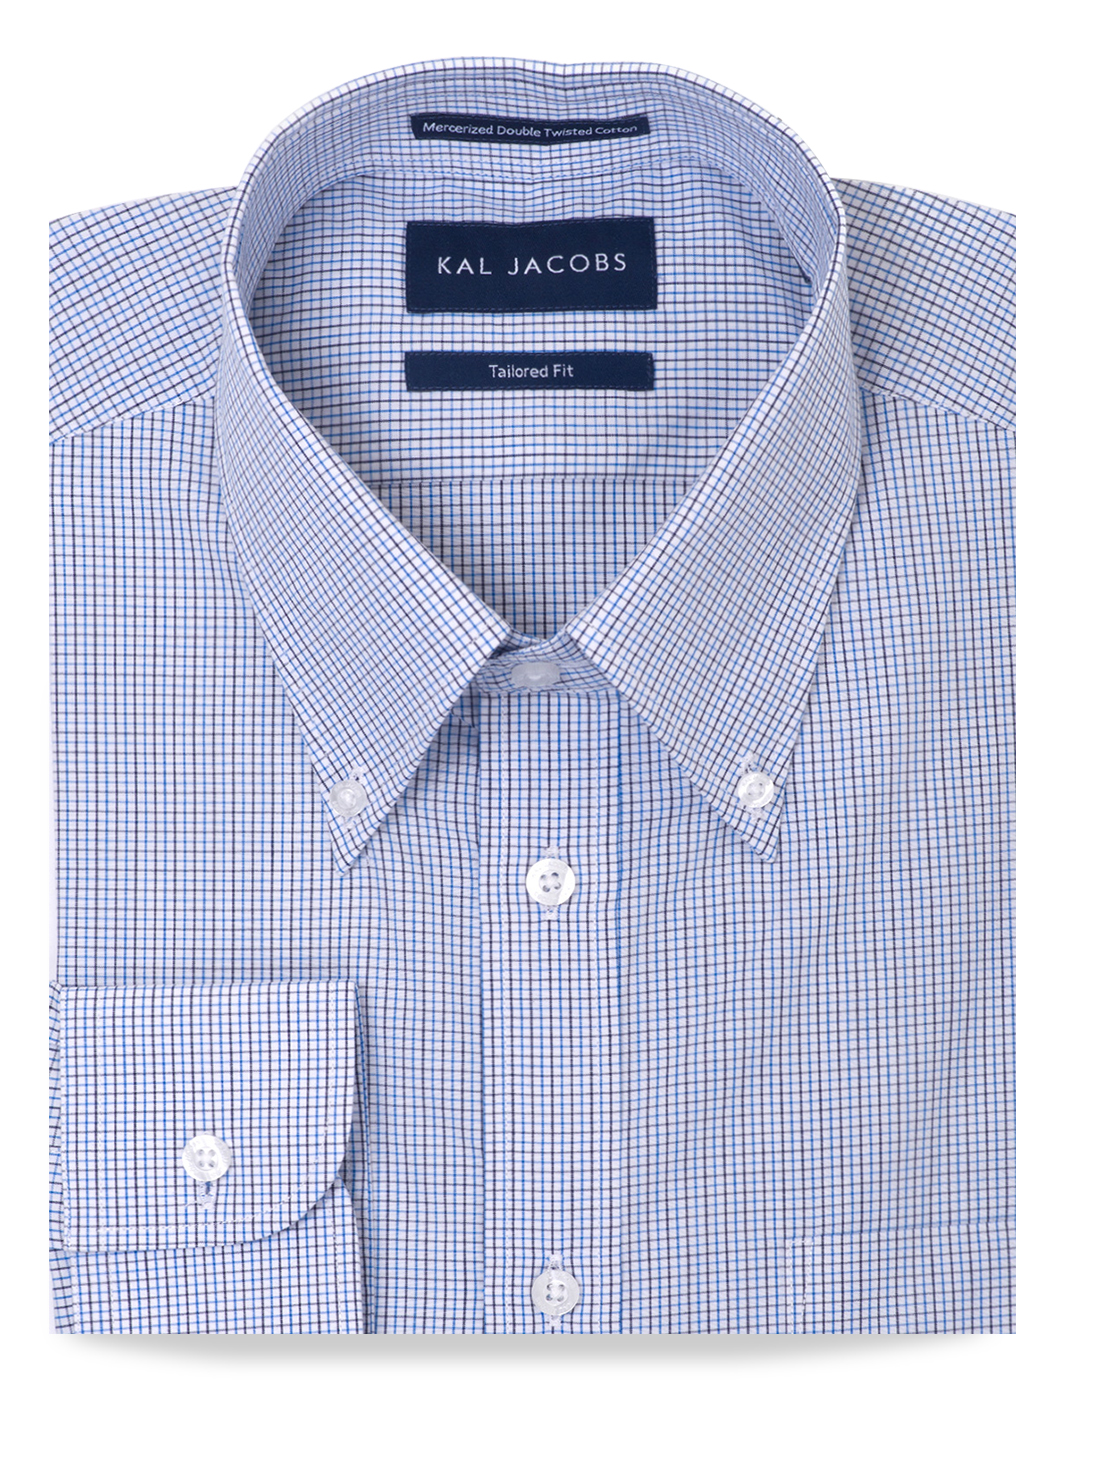 Tailored Fit Black & Blue Tattersall Cotton Shirt - Kal Jacobs